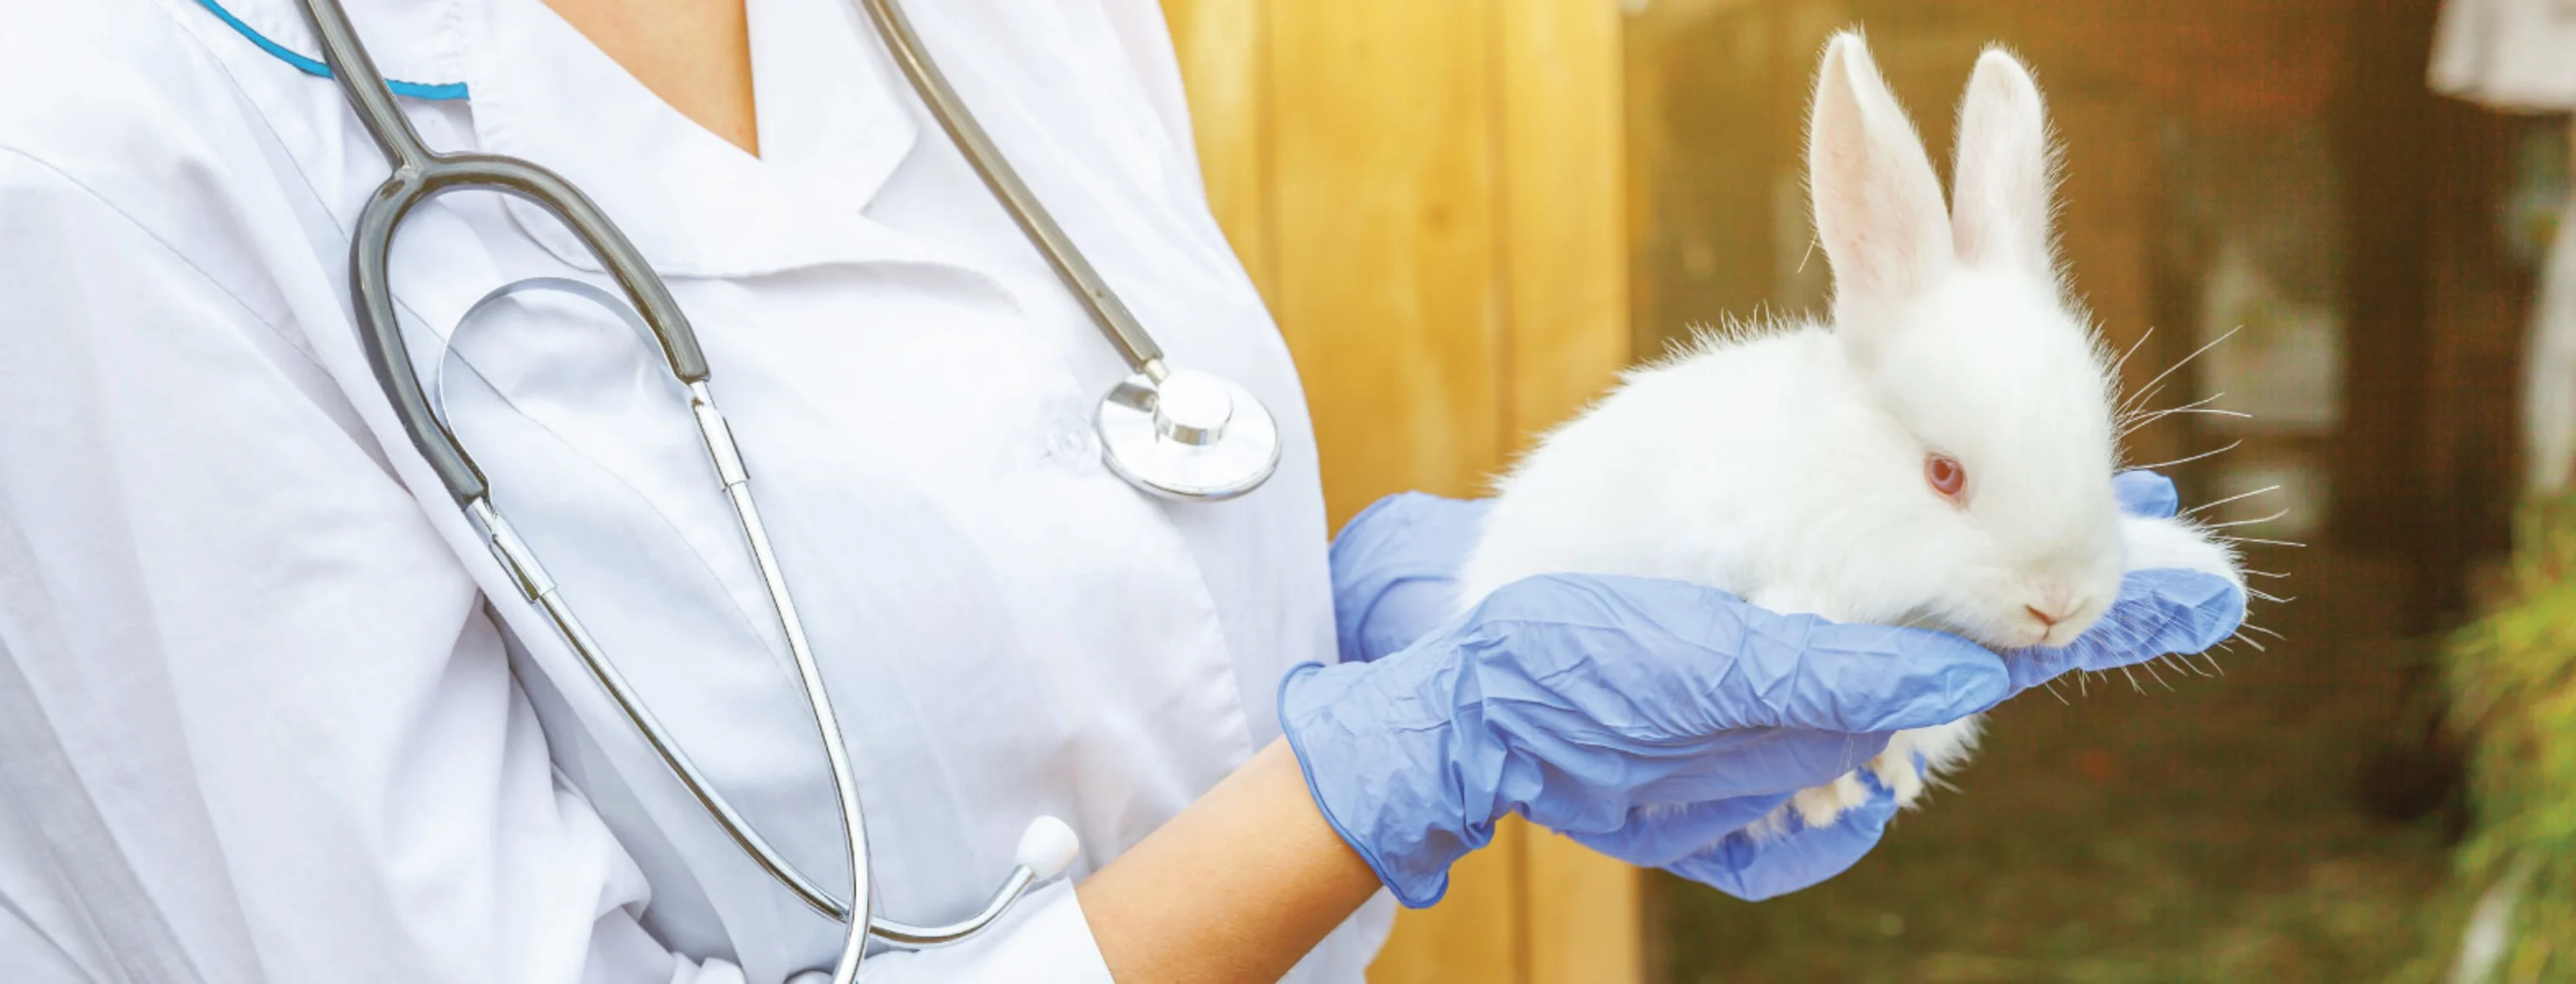 Rabbit being held by doctor